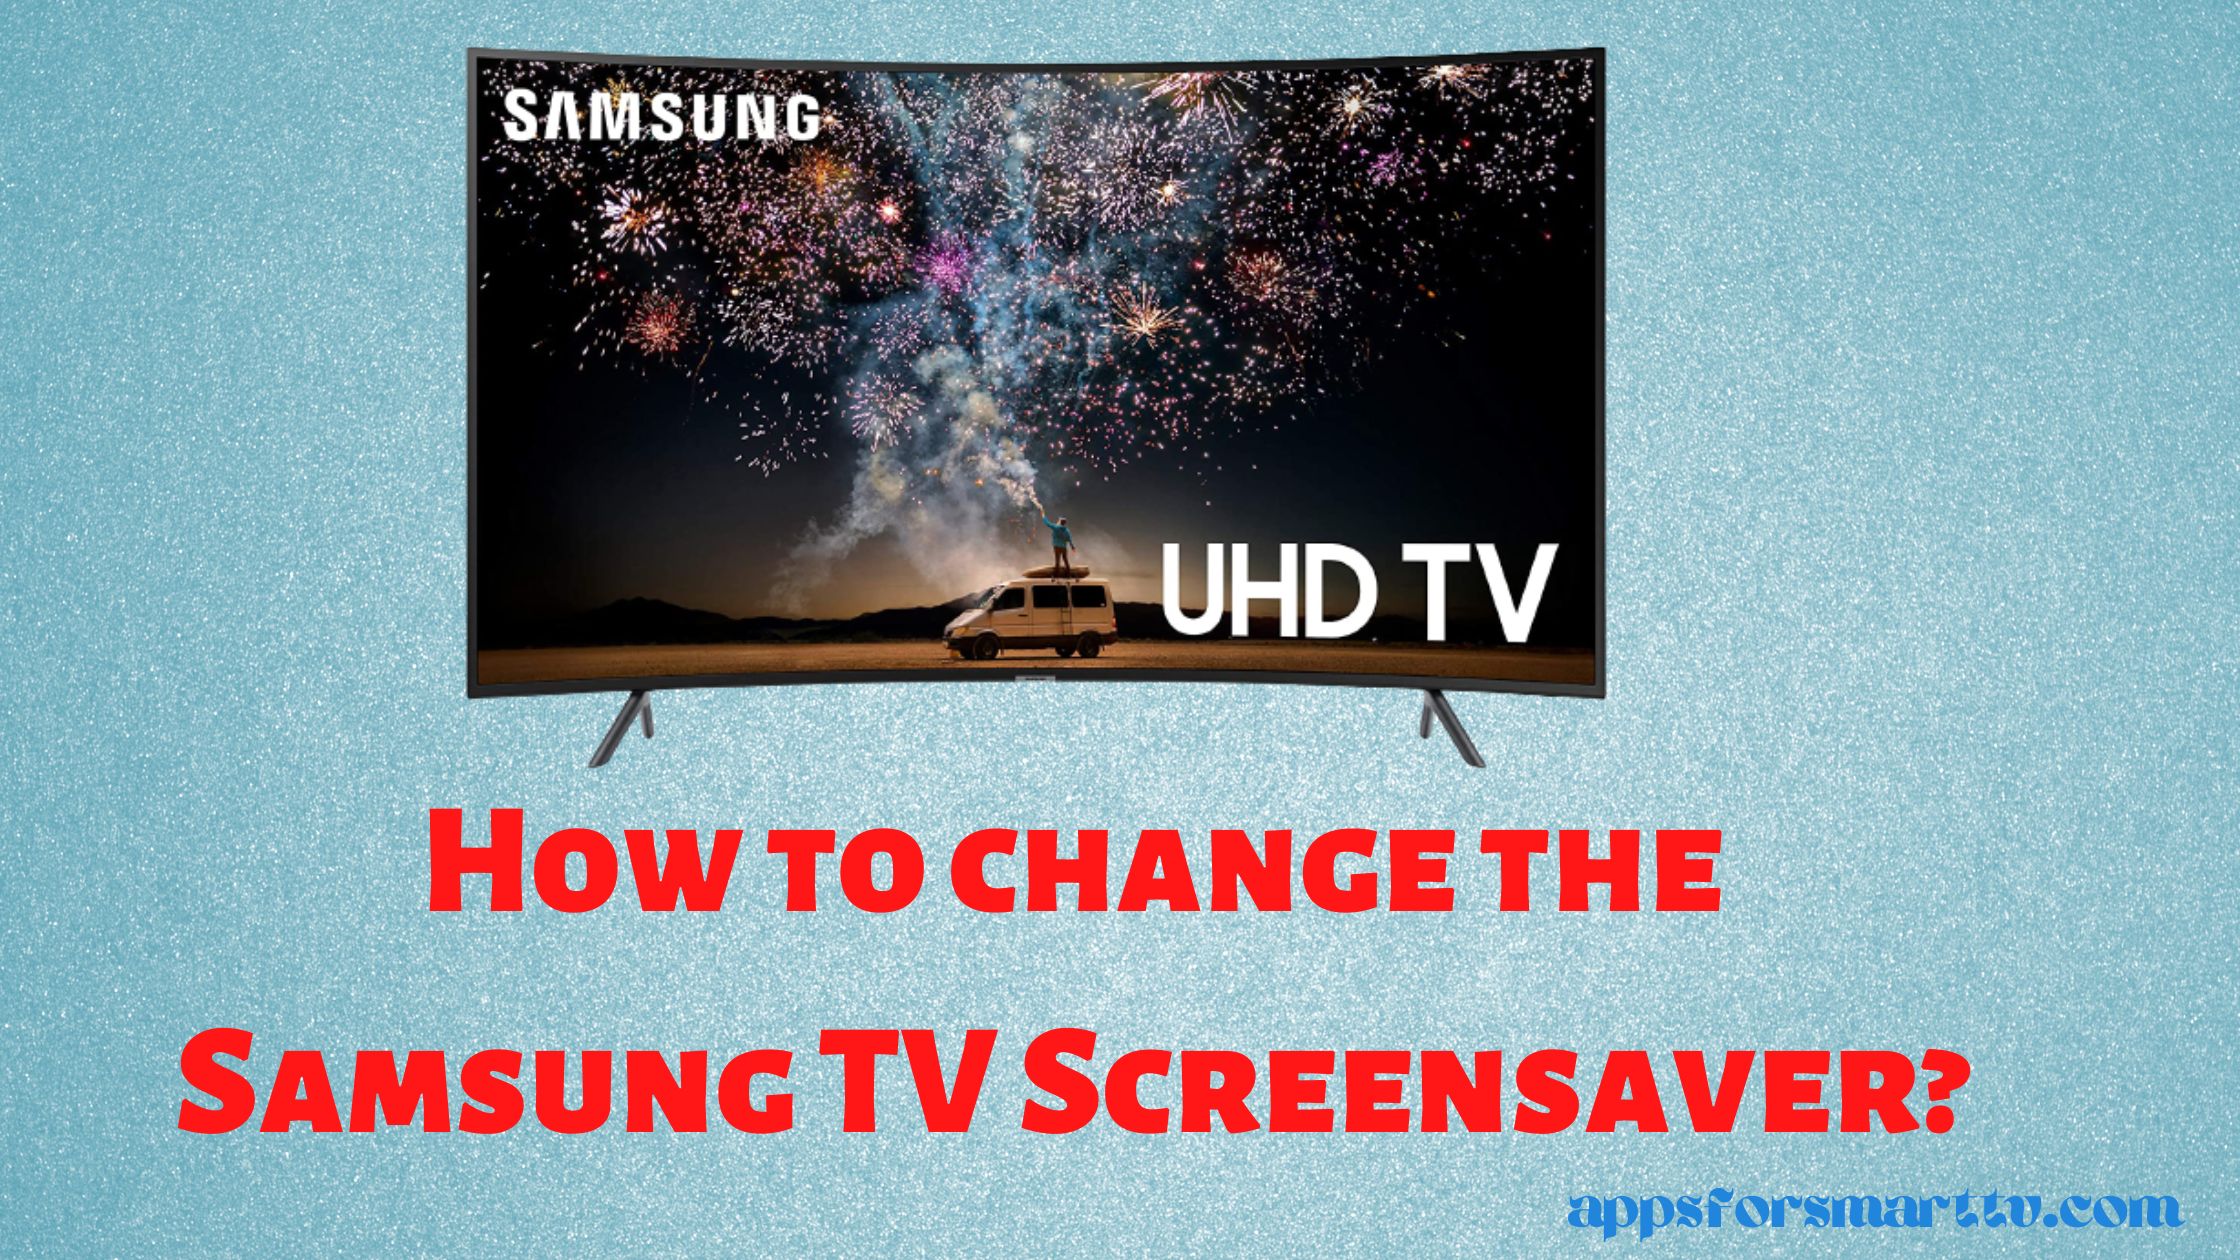 How to change the Samsung TV Screensaver?